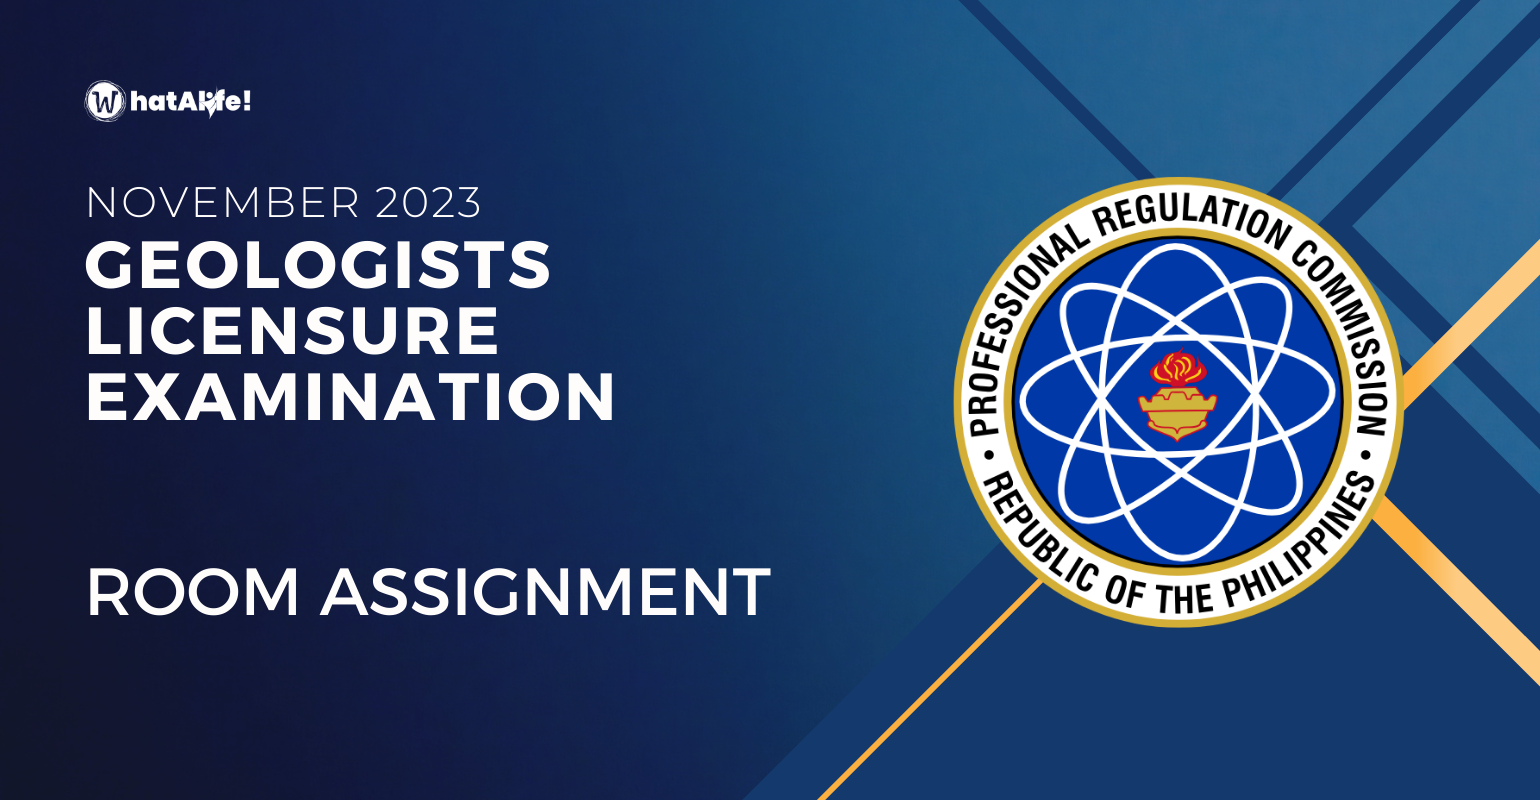 Room Assignment — November 2023 Geologists Licensure Exam